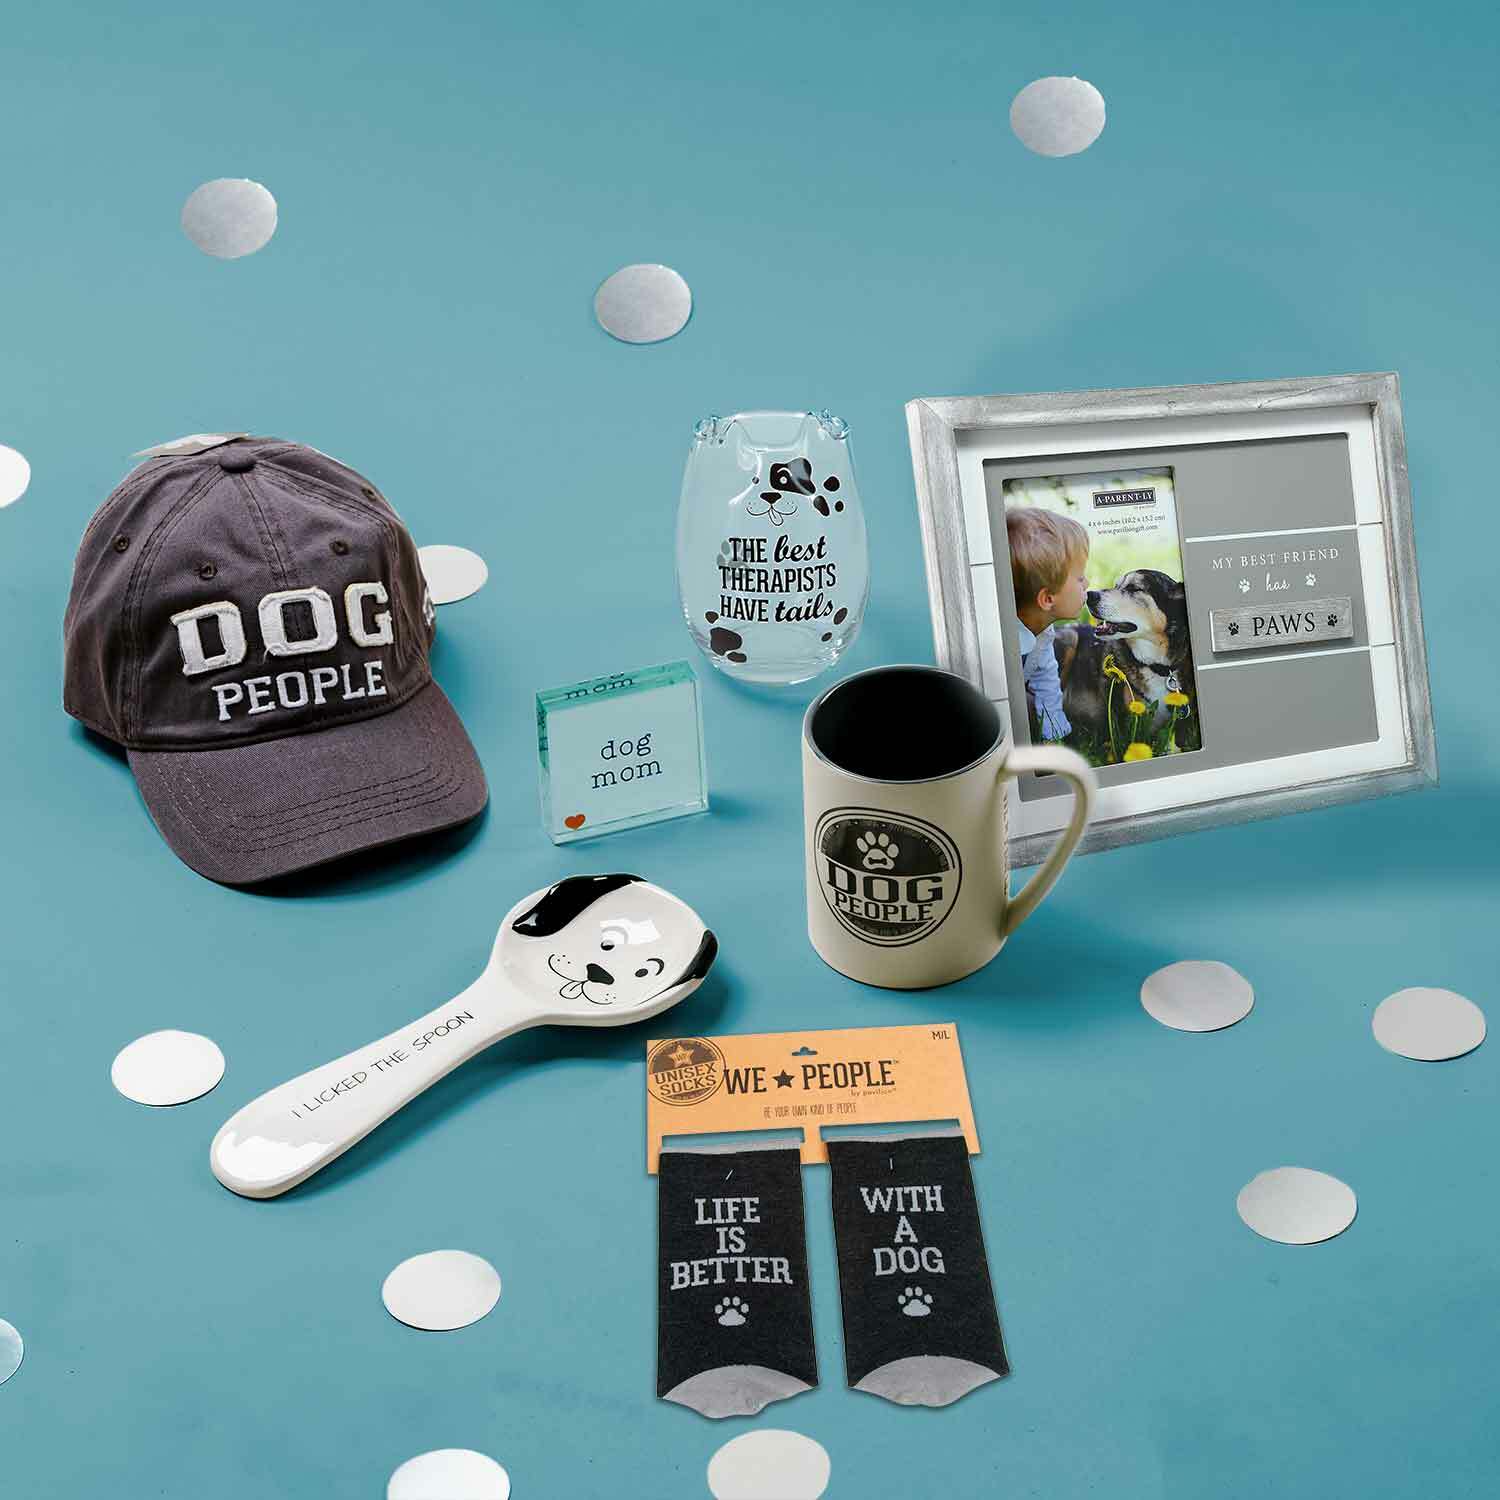 Dog Lover Gift Box by Packaged With Positivity - Dog Lover Gift Box - $100.00 Value